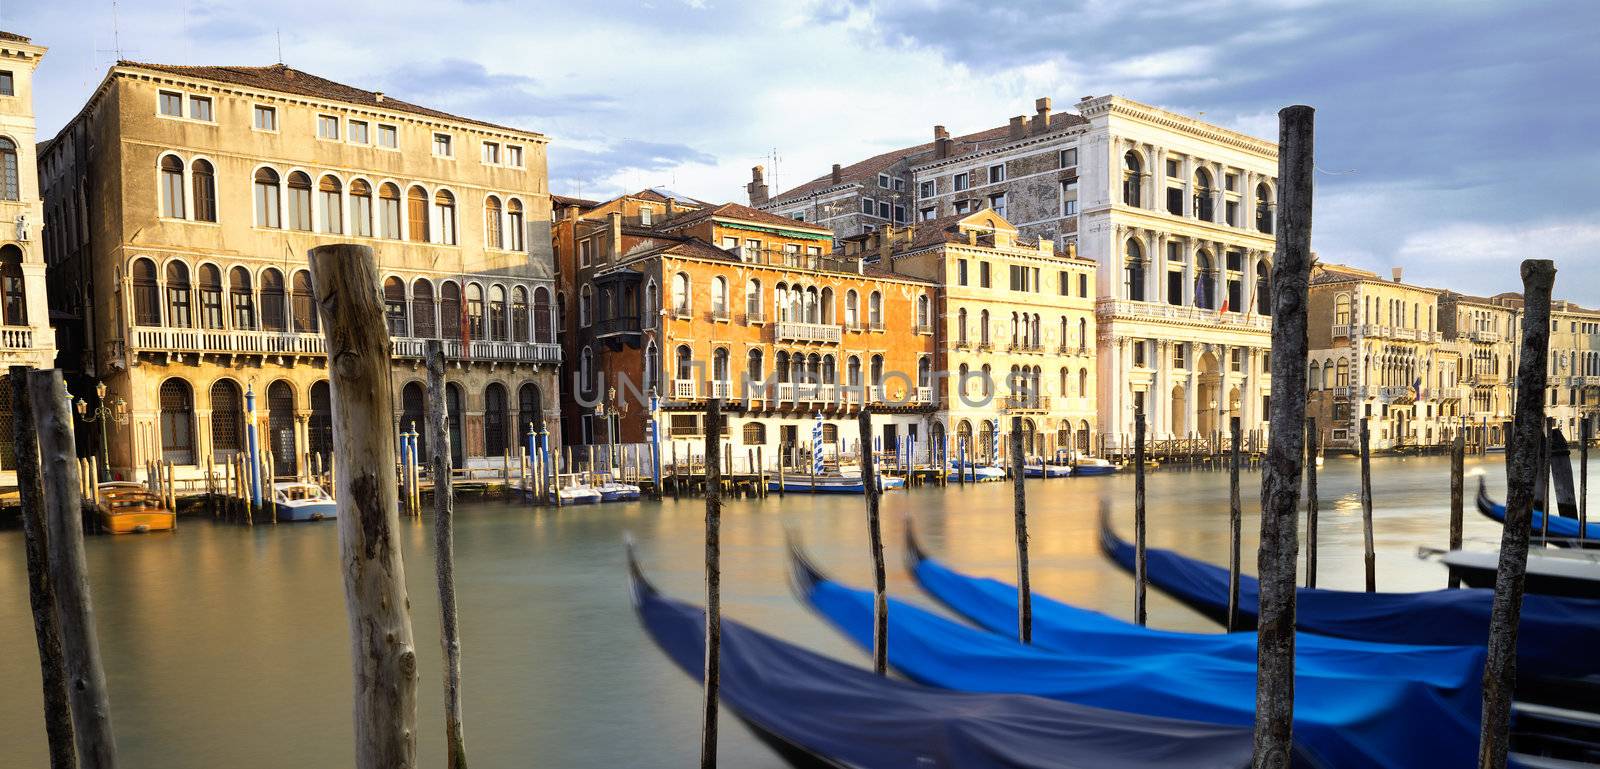 Grand Canal in Venice, Italy  by ventdusud